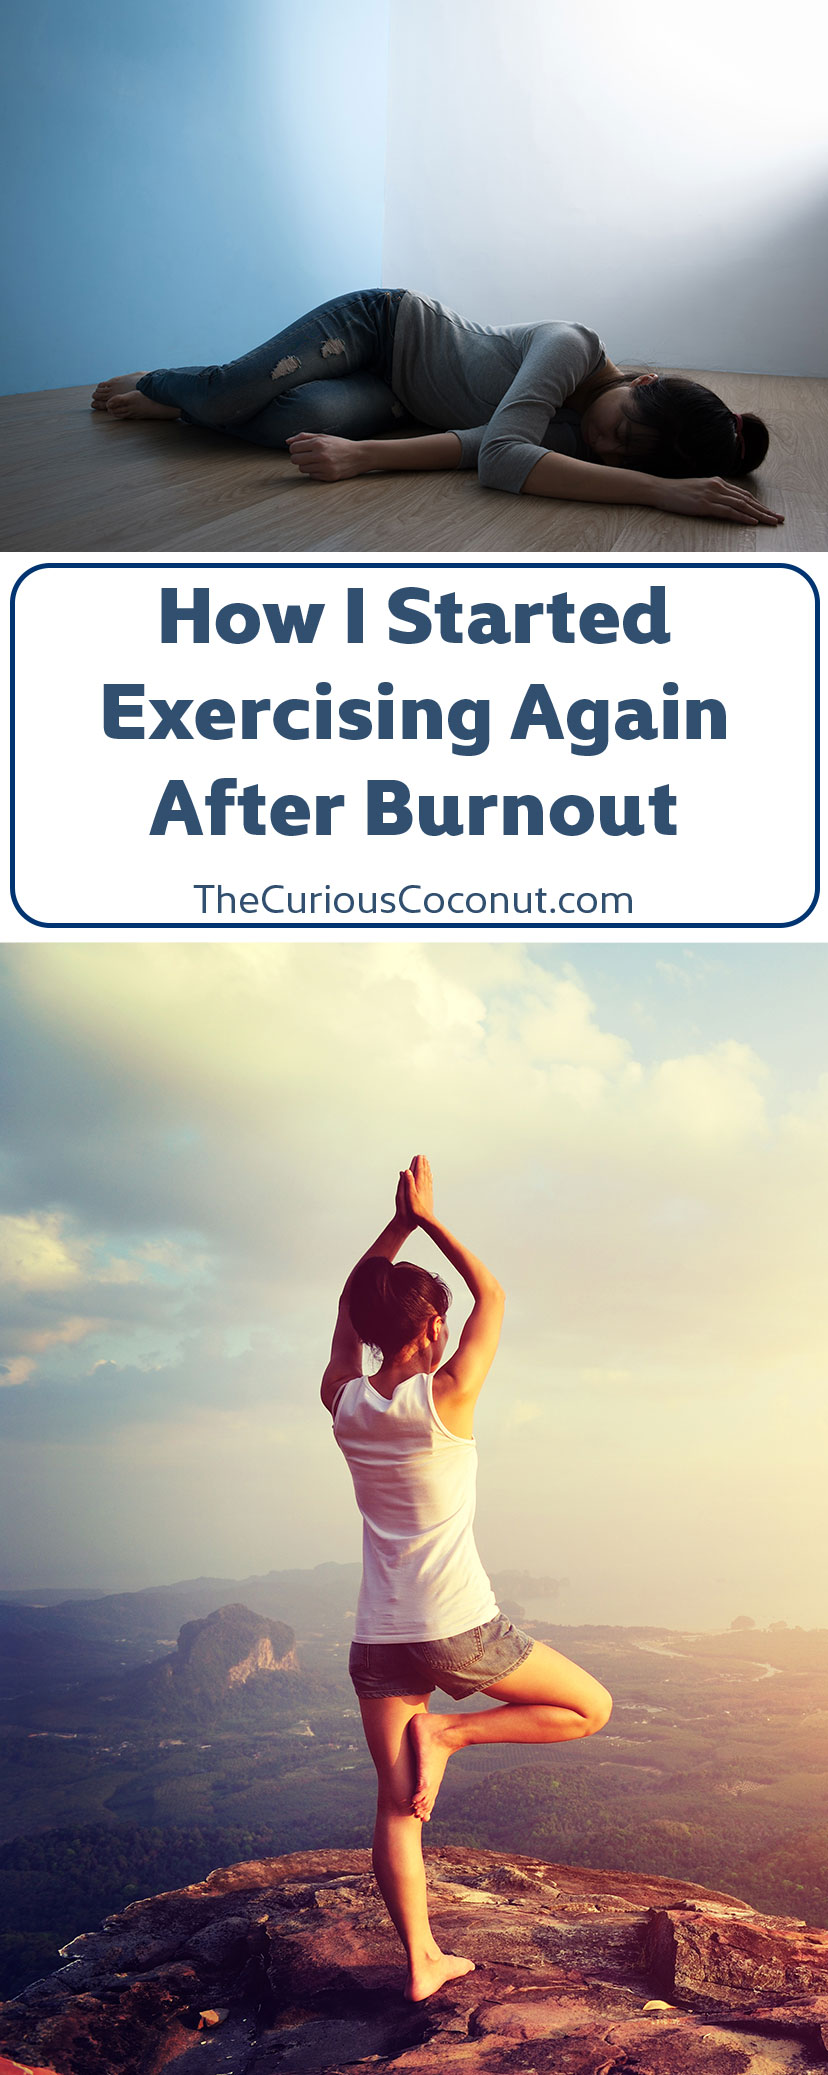 How I Started Exercising Again After Burnout // TheCuriousCoconut.com